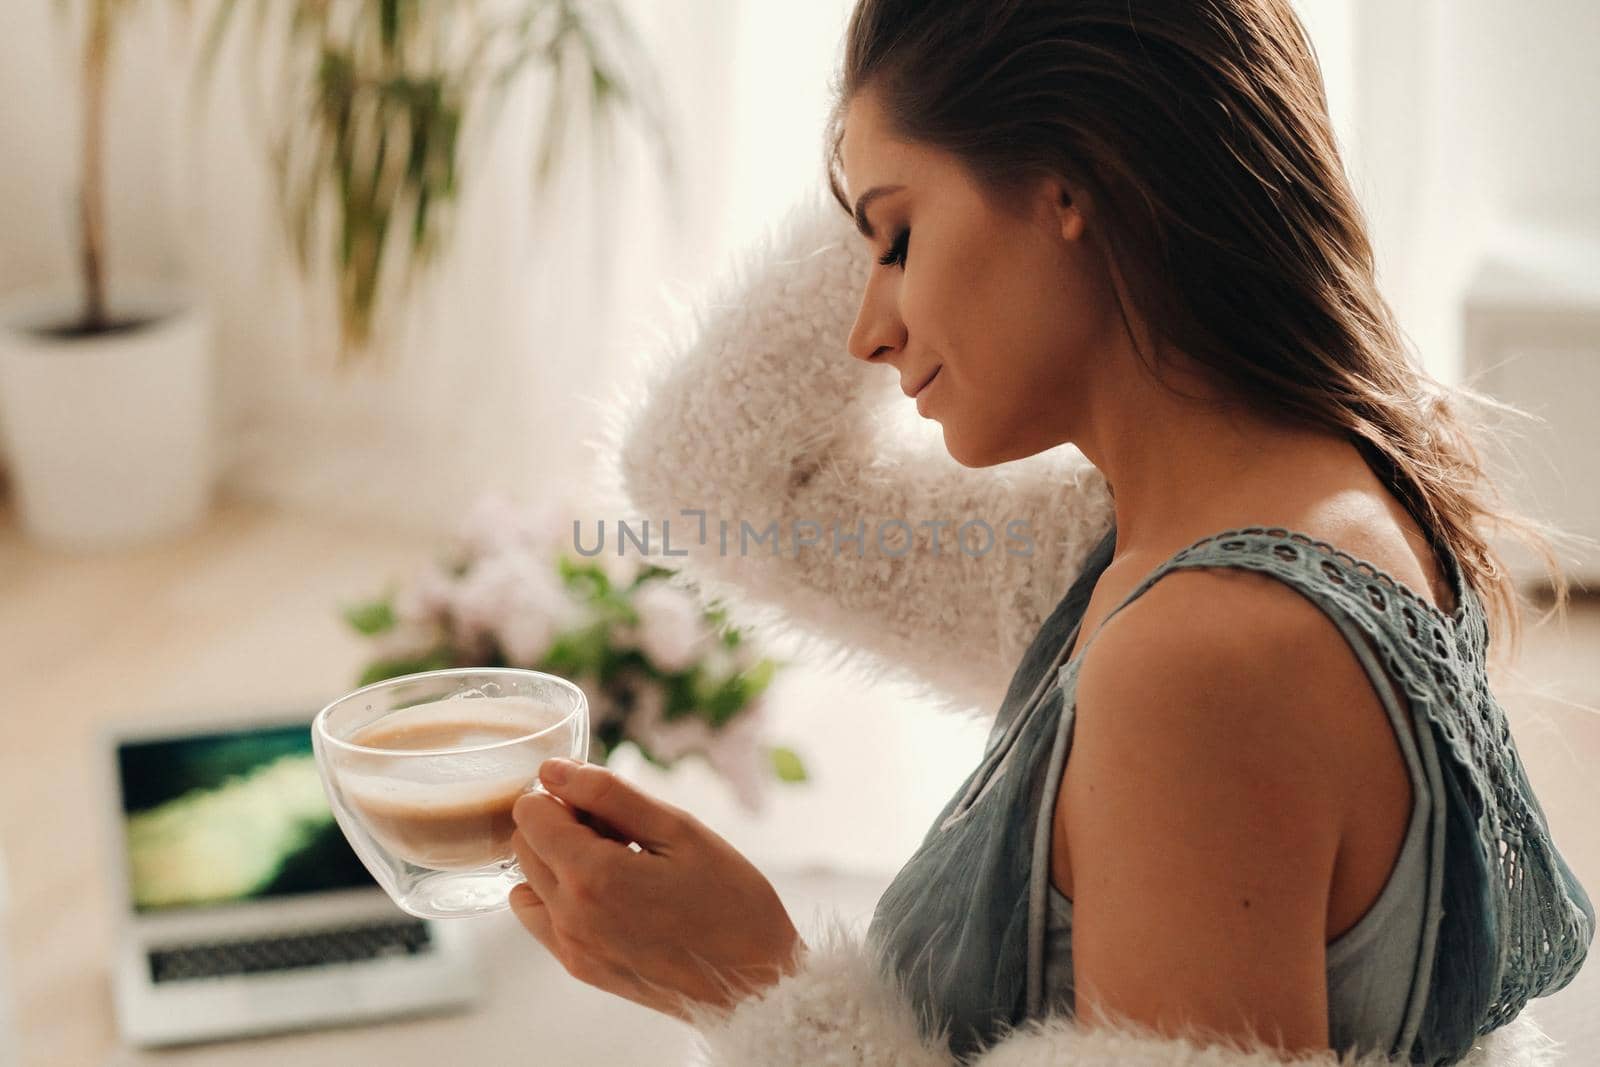 a relaxed girl at home drinks coffee and watches a movie.Domestic calm.The girl is sitting comfortably on the sofa and drinking coffee.